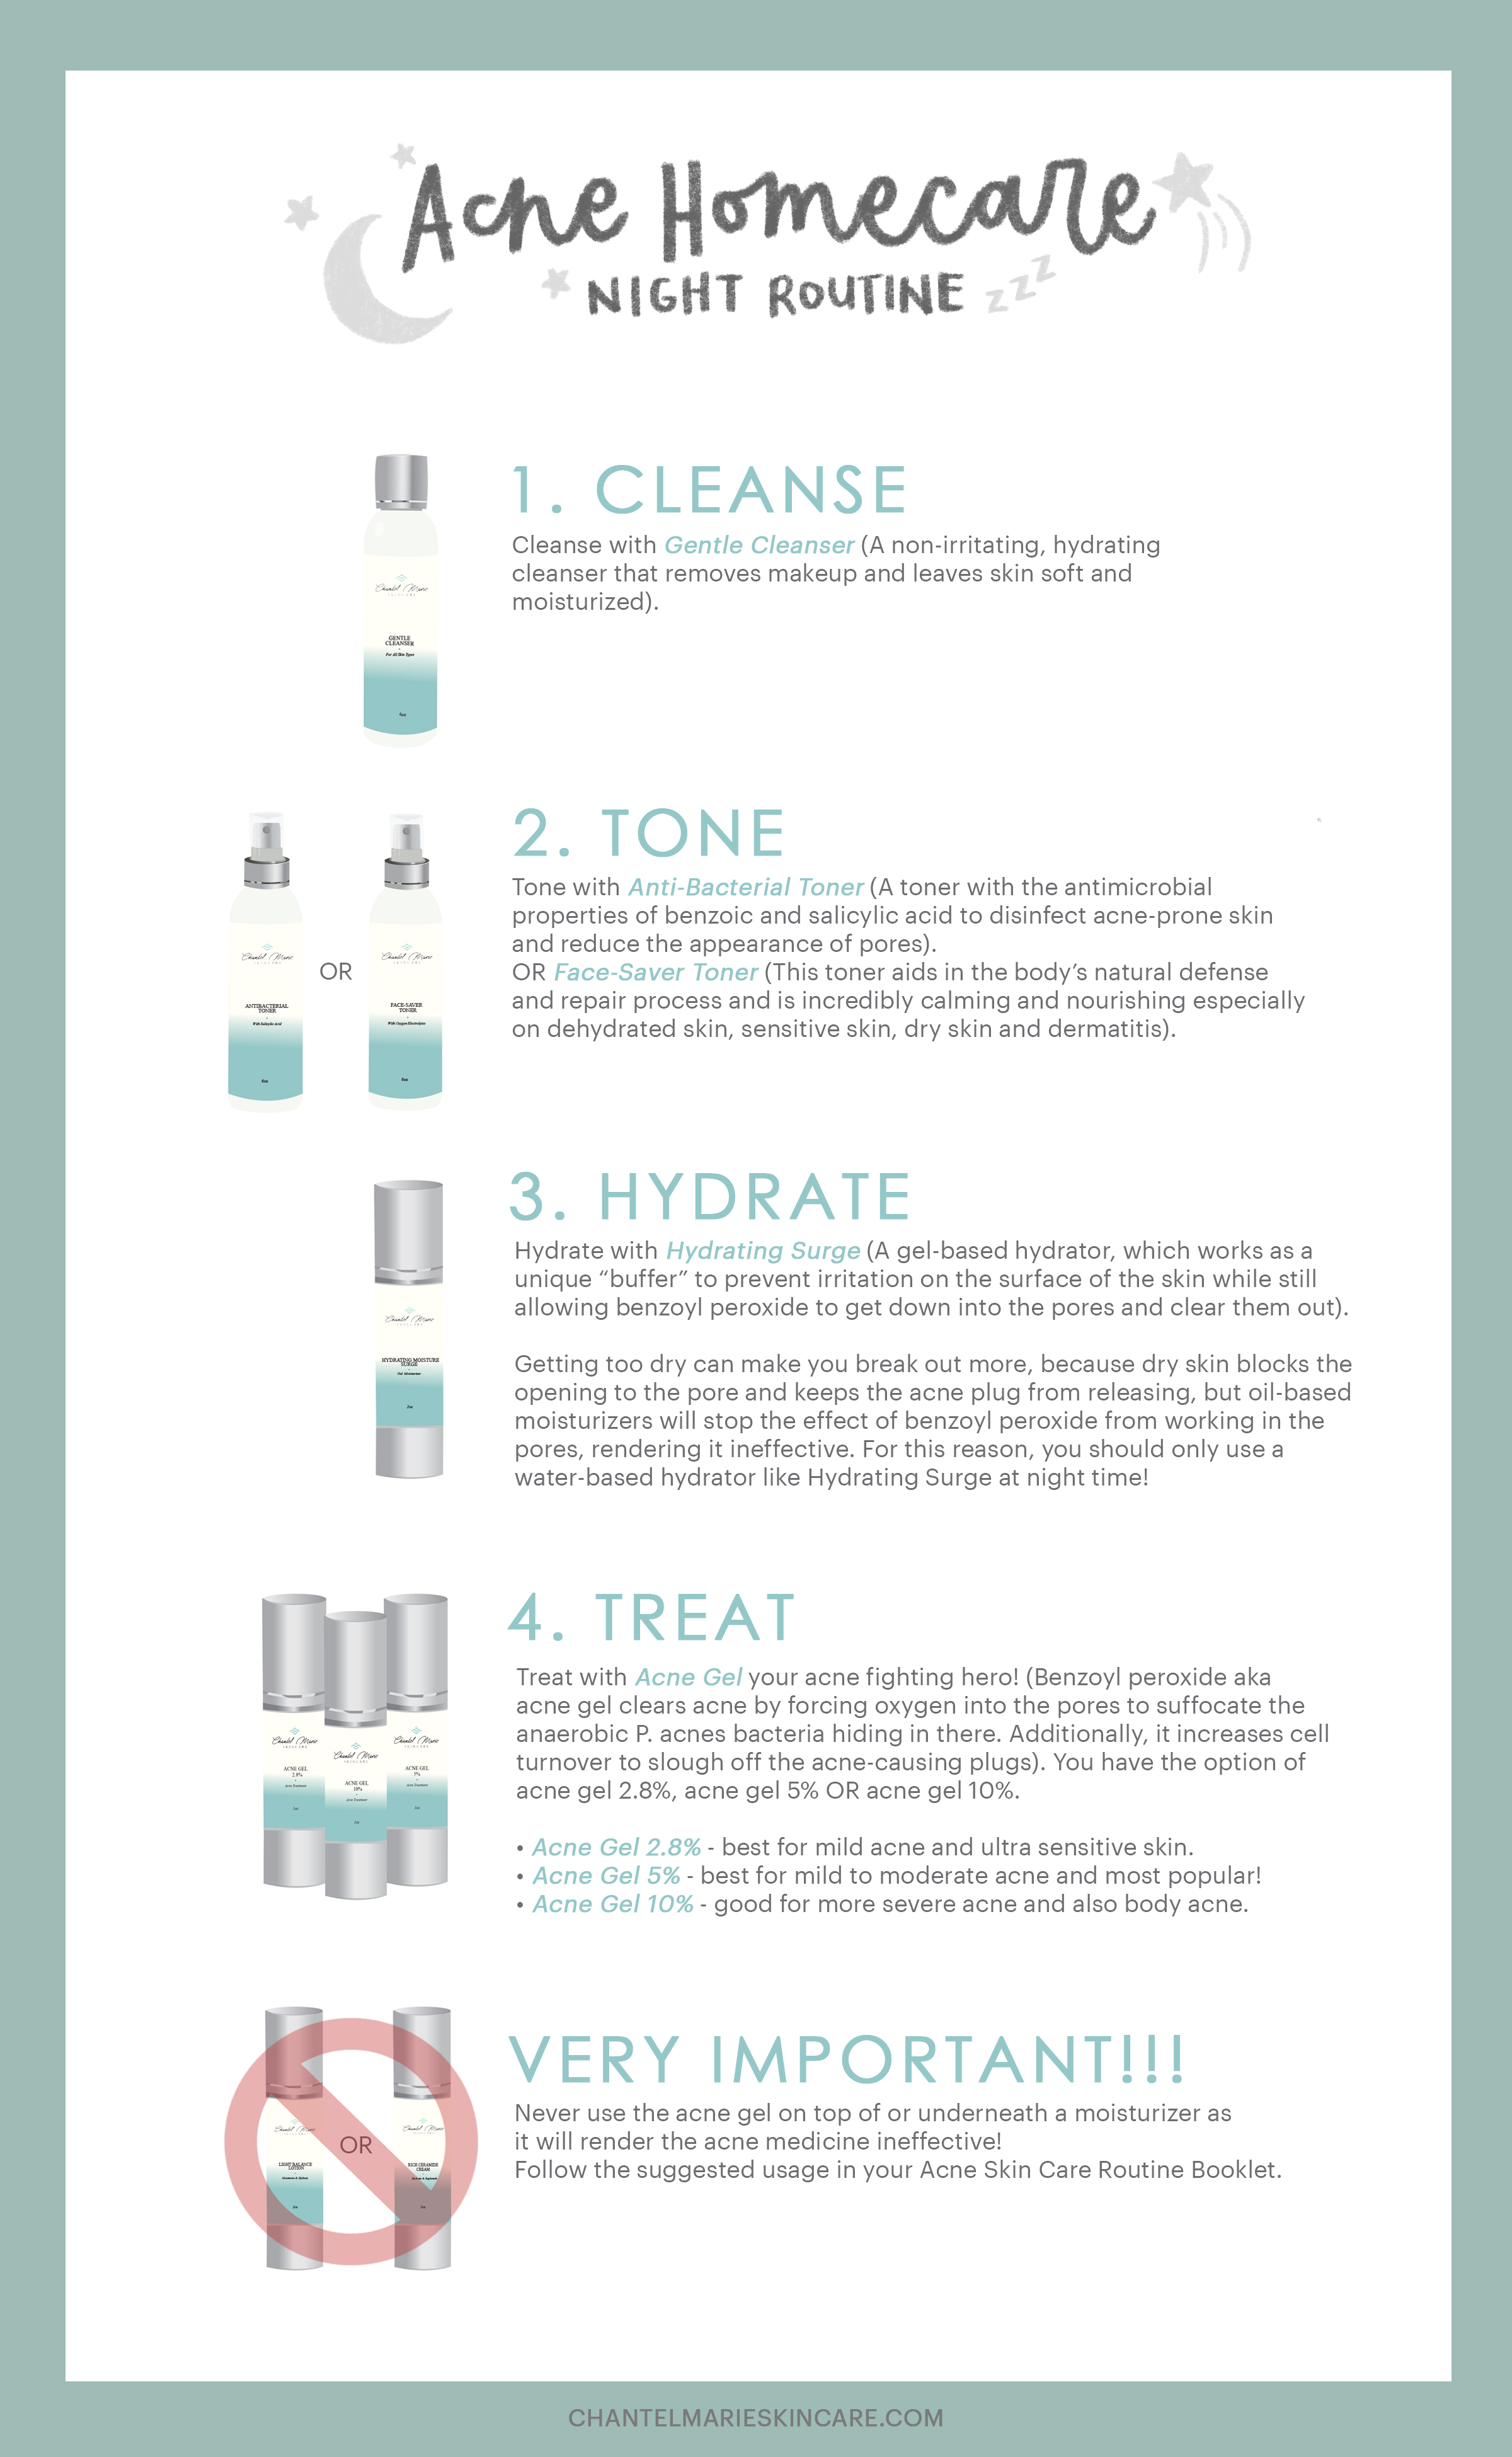 Chantel Marie Skincare - Night Routine.png  by chantel